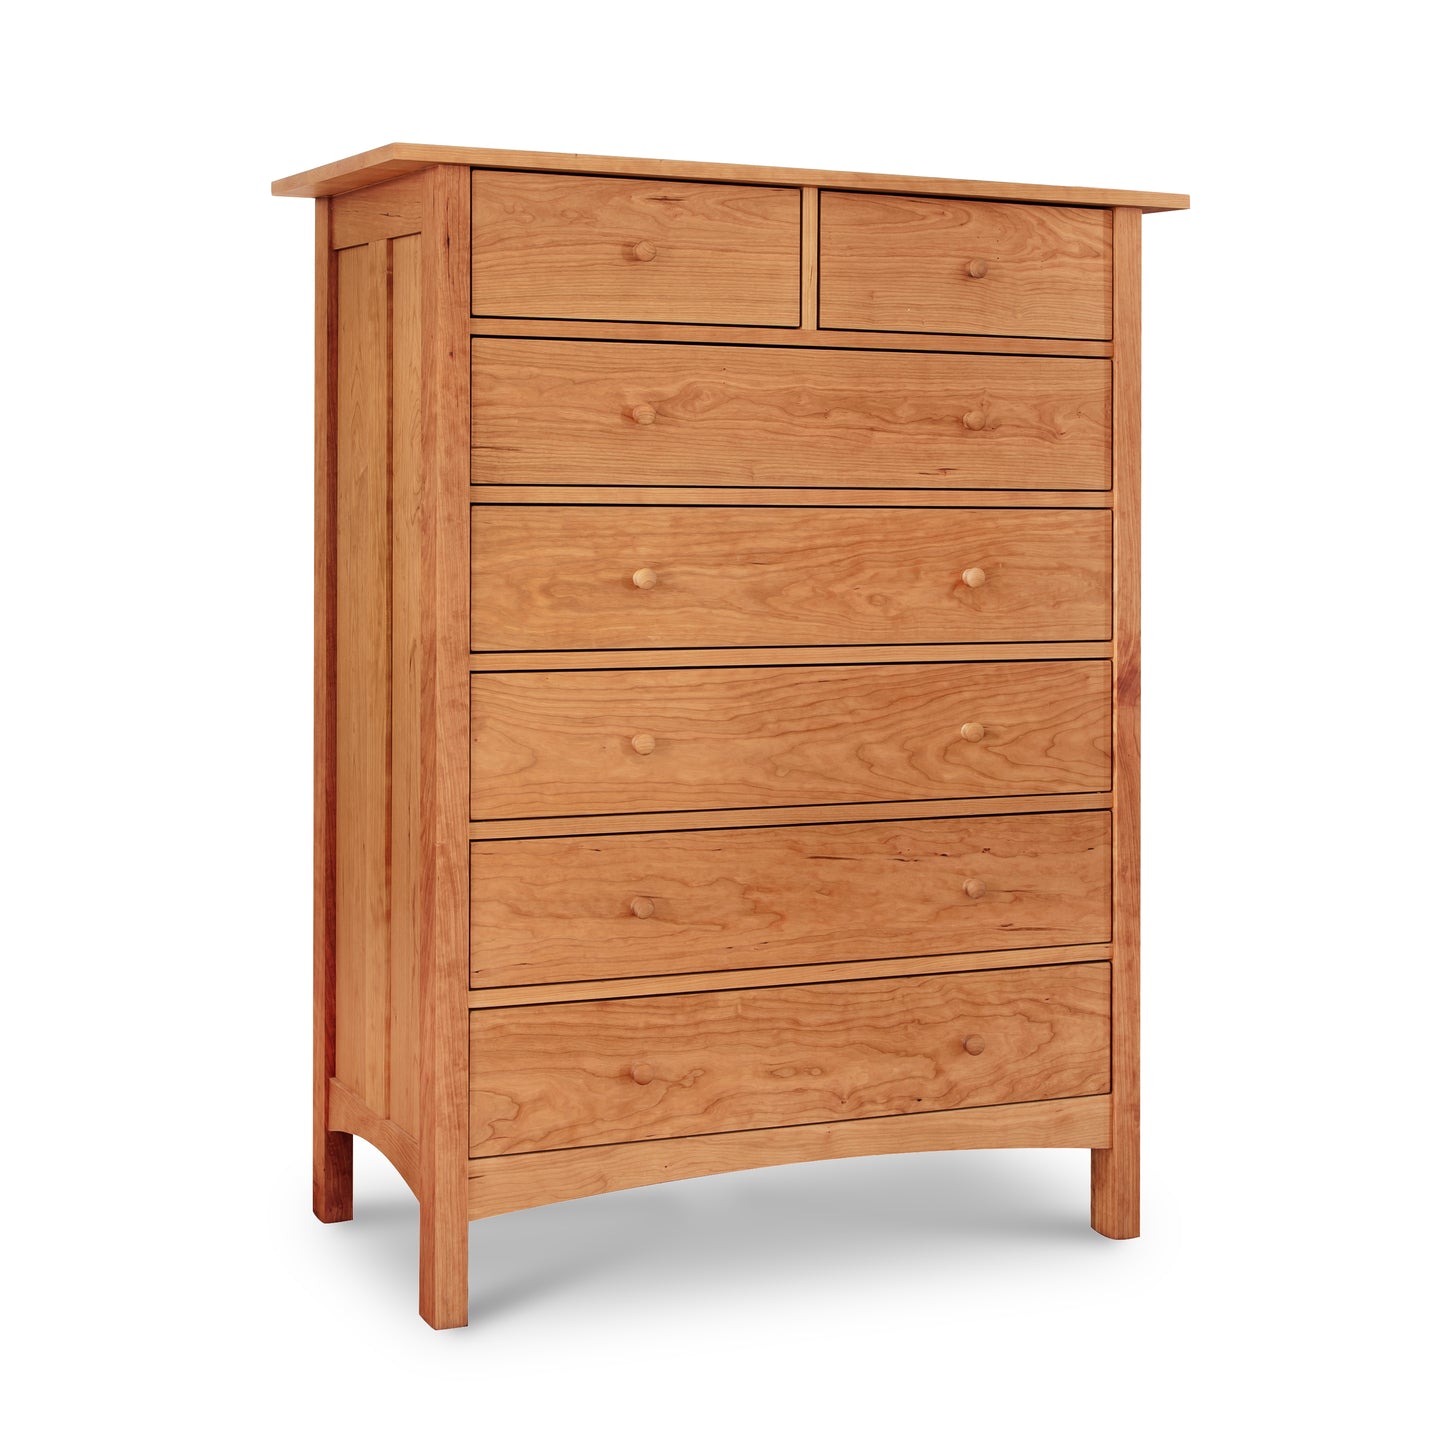 A Vermont Furniture Designs Burlington Shaker 7-Drawer Chest on a white background.